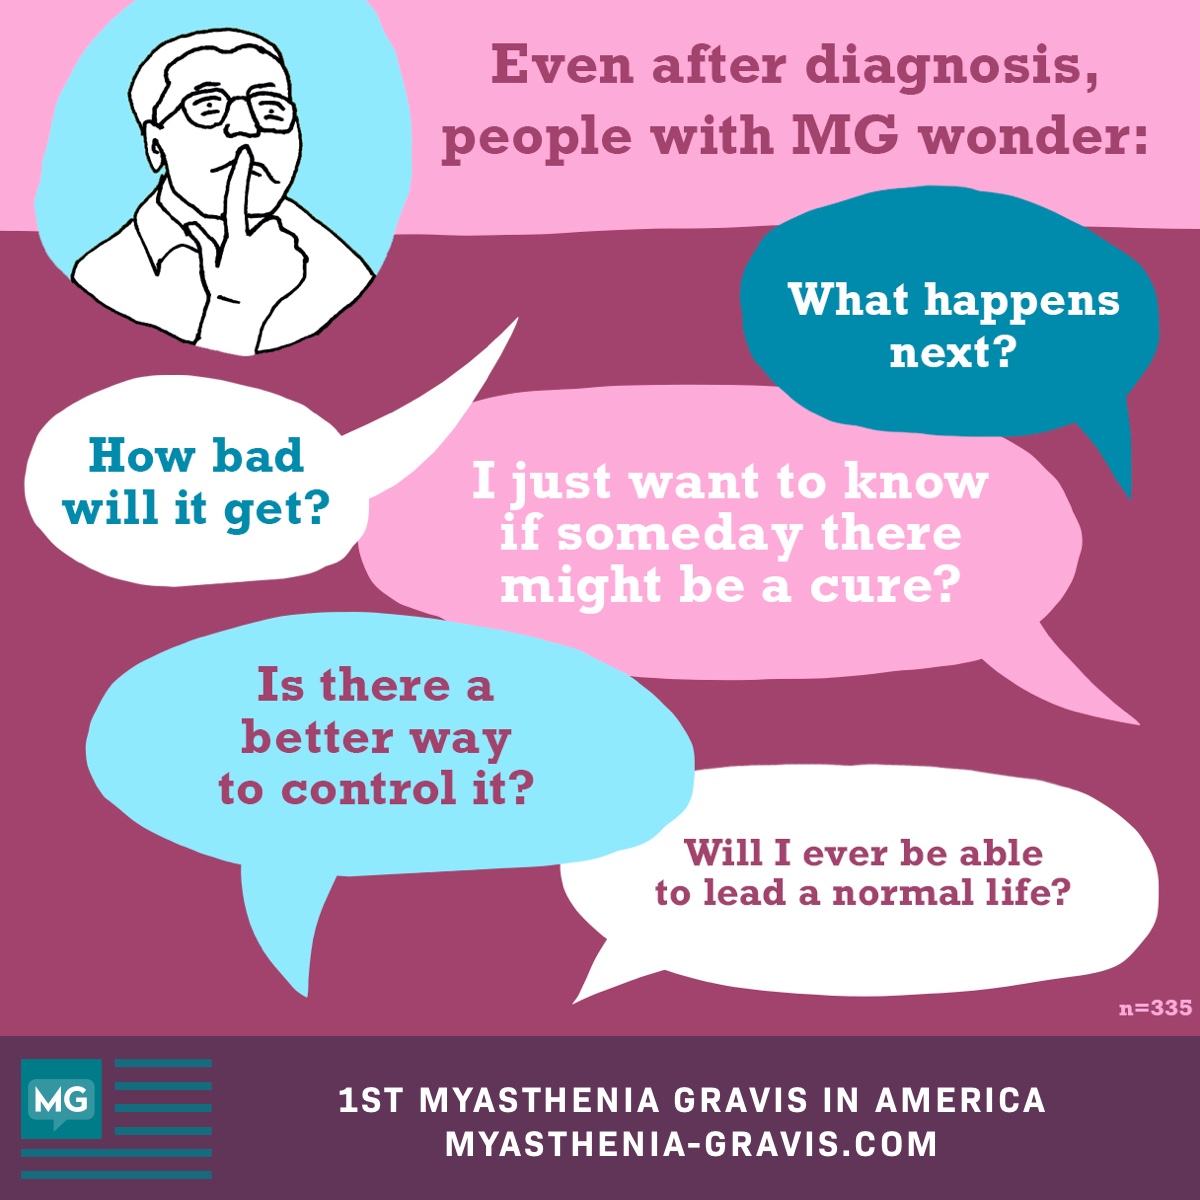 Quotes from respondents indicating that even after an MG diagnosis, they are still left with questions about their future.